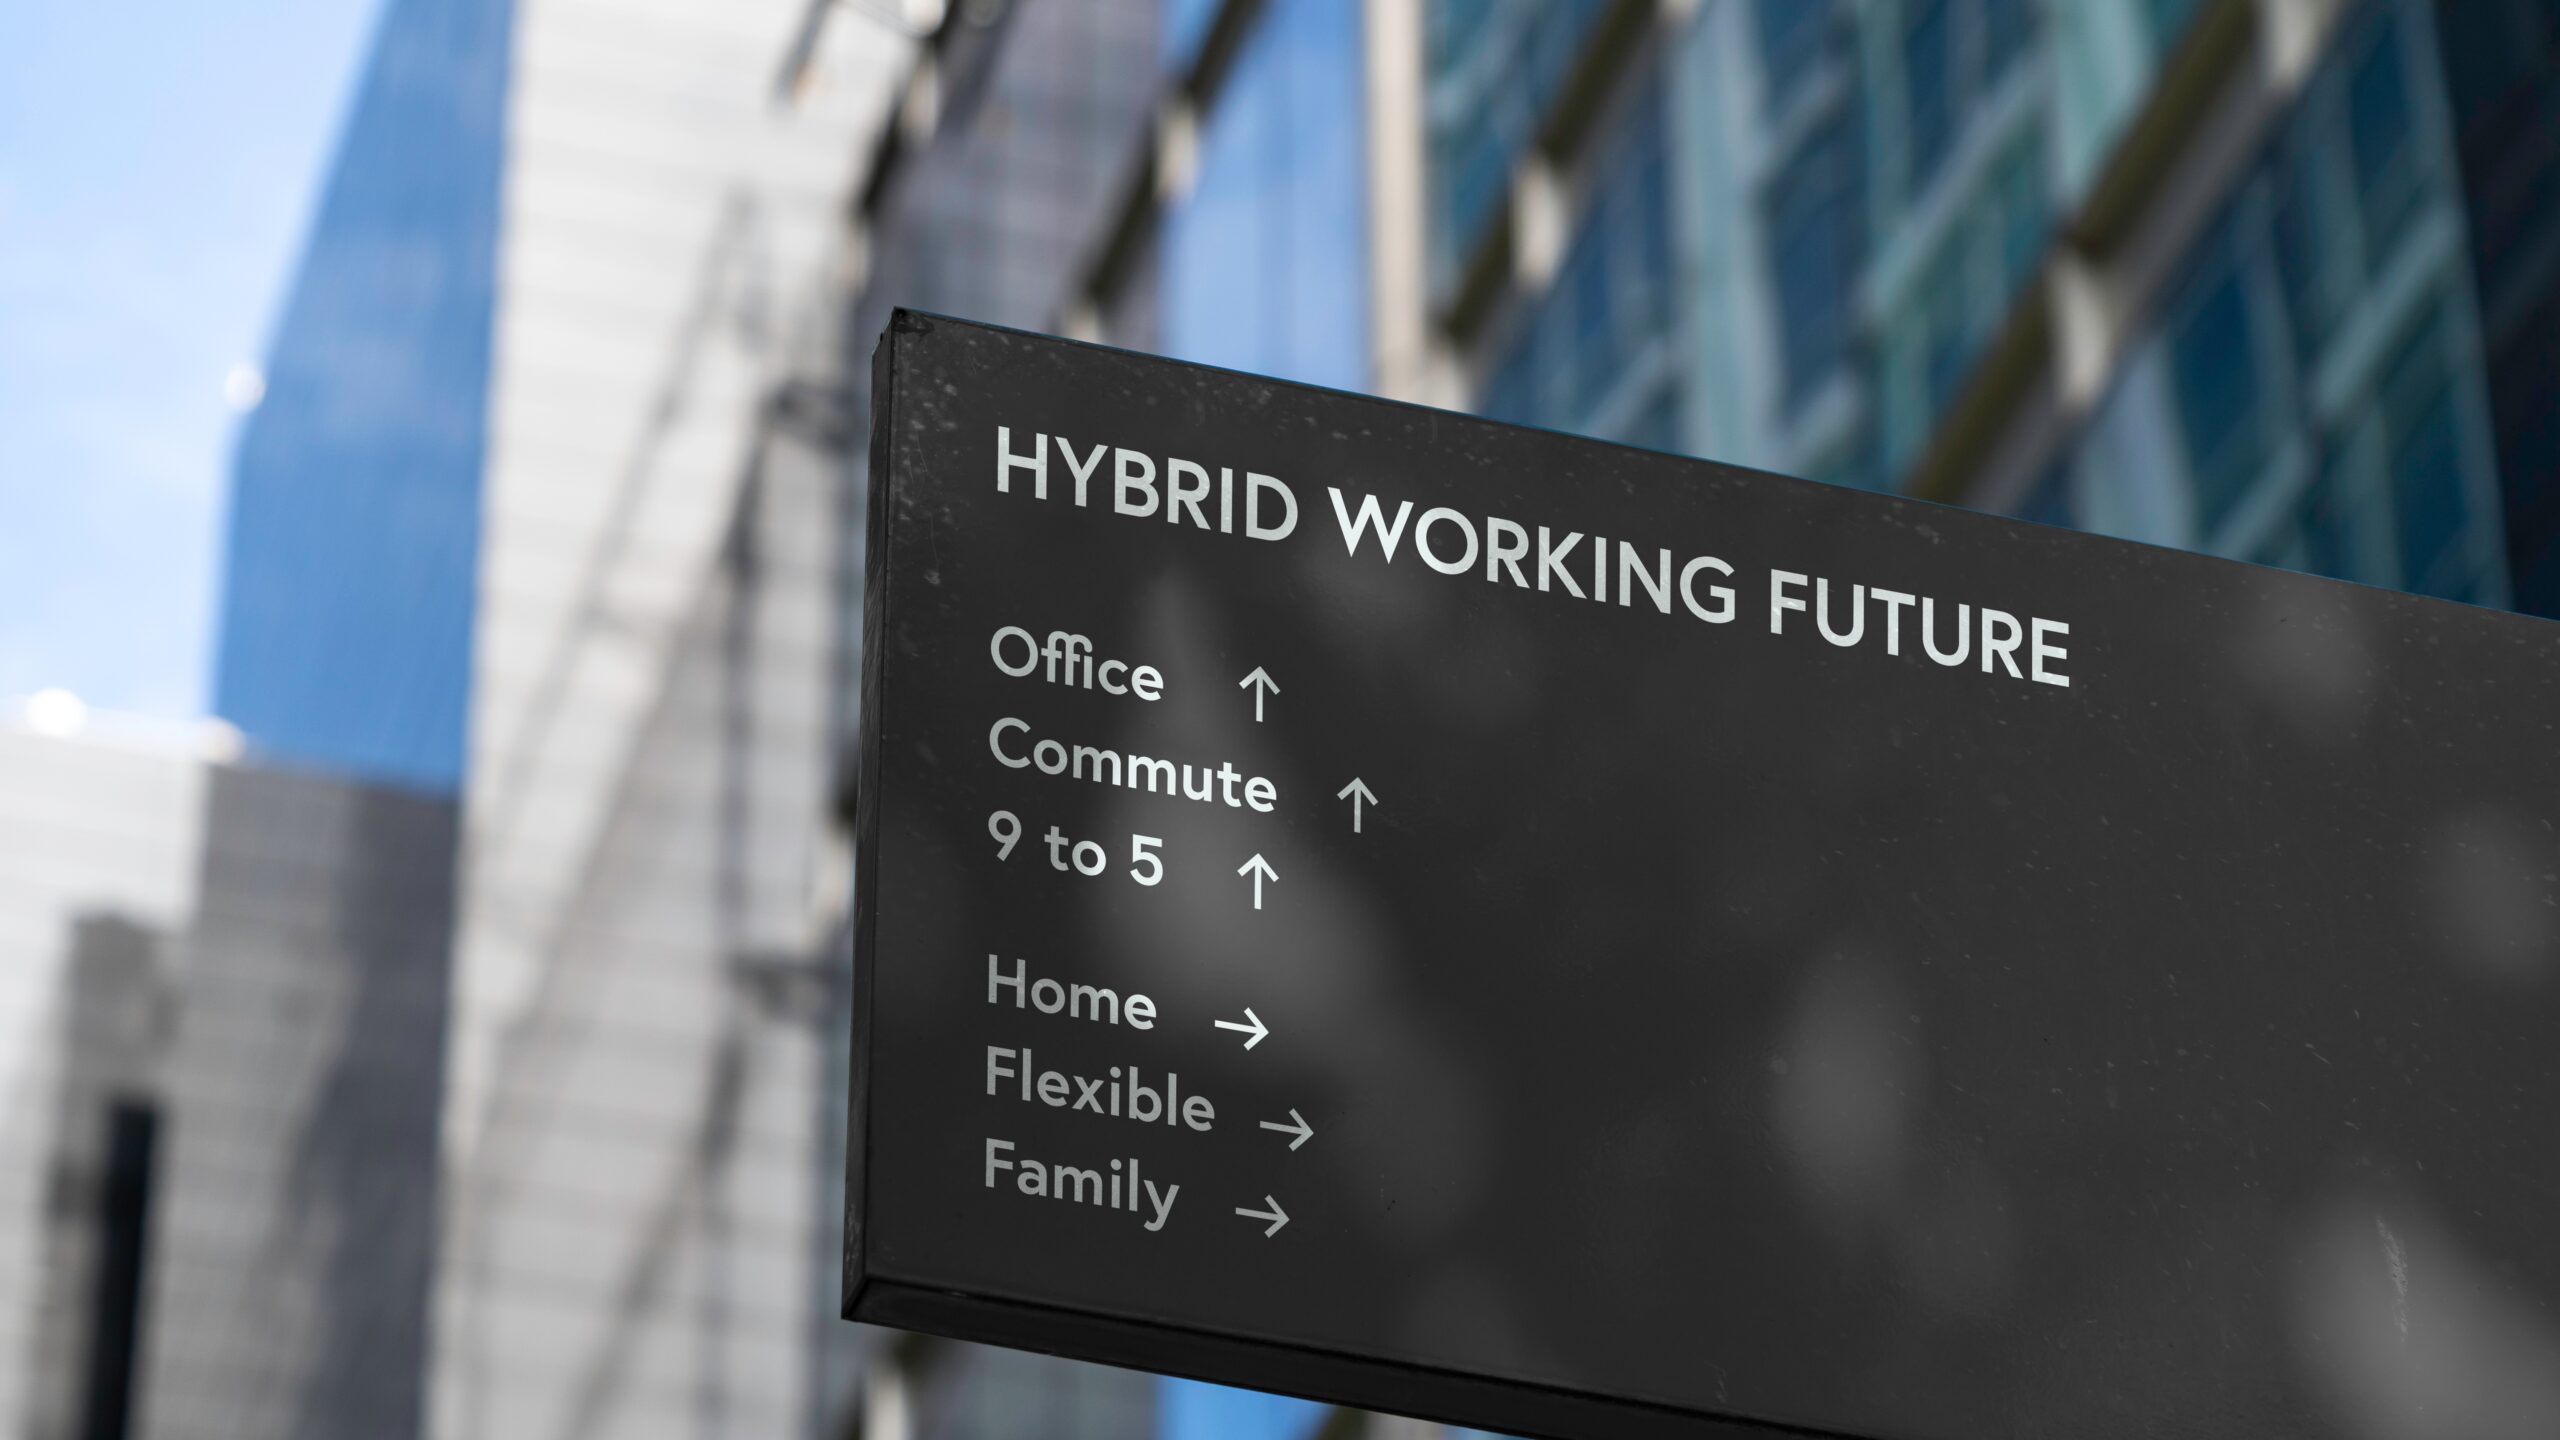 The hybrid working dilema